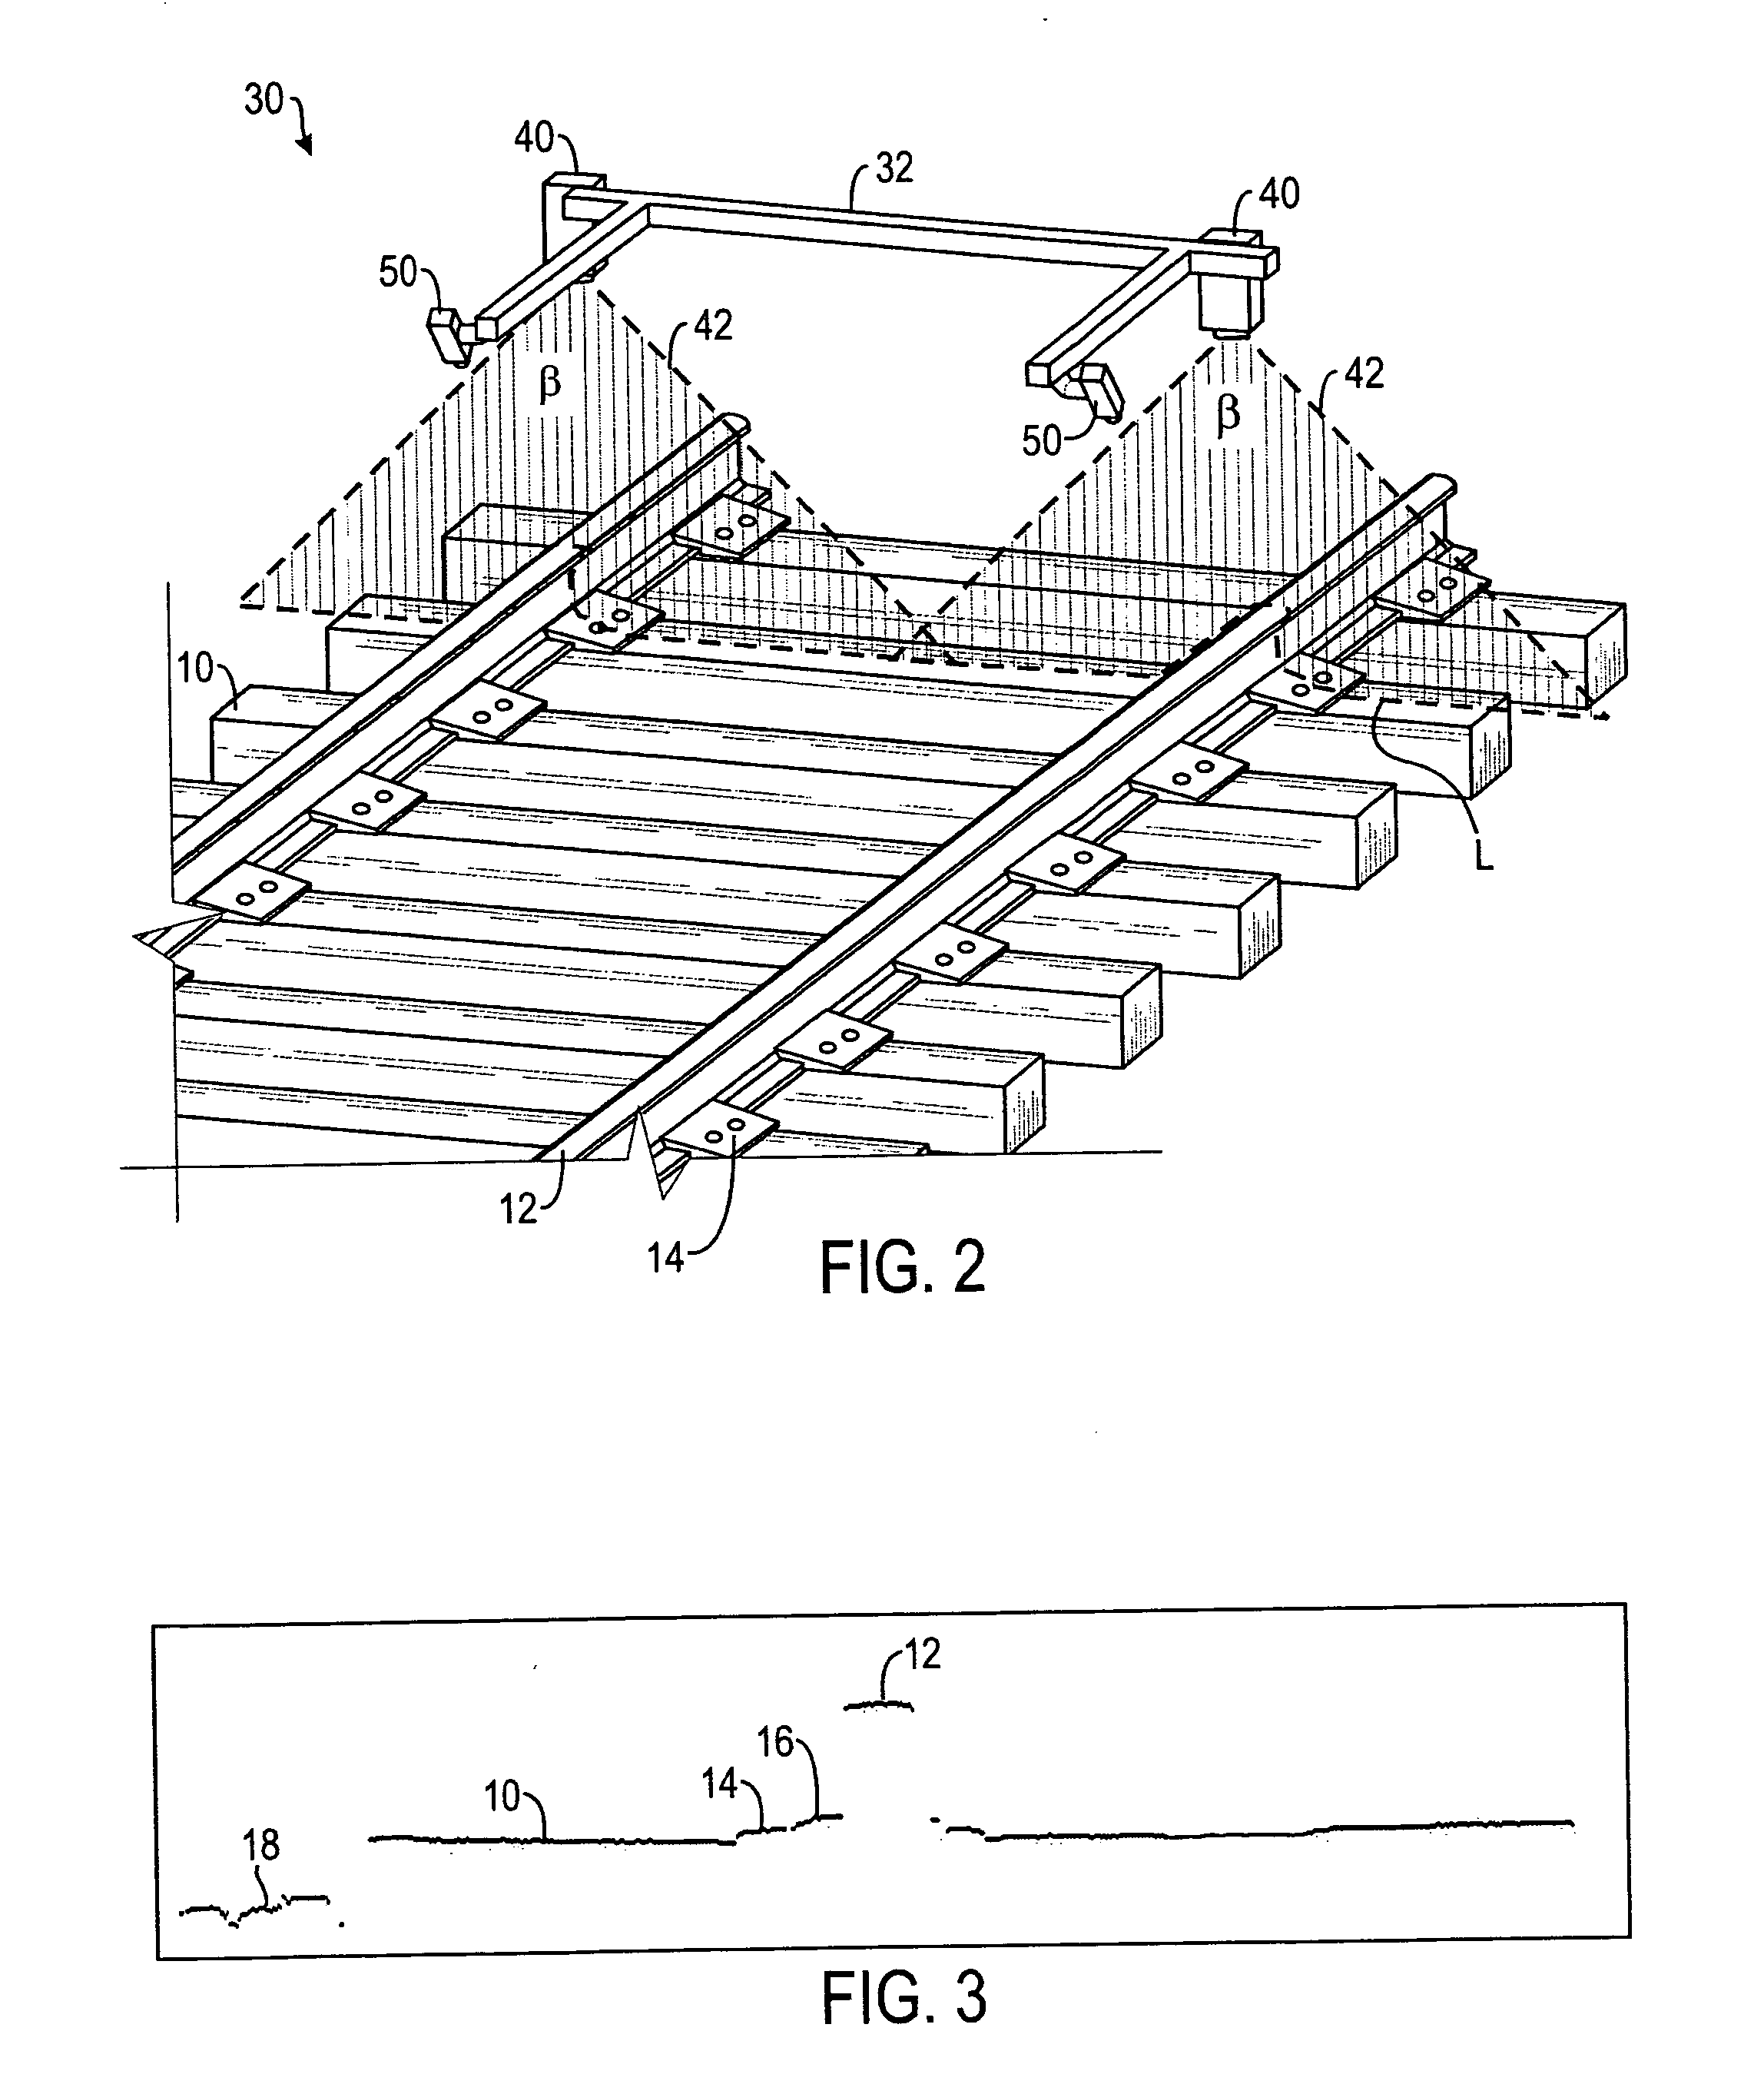 System and method for inspecting railroad track